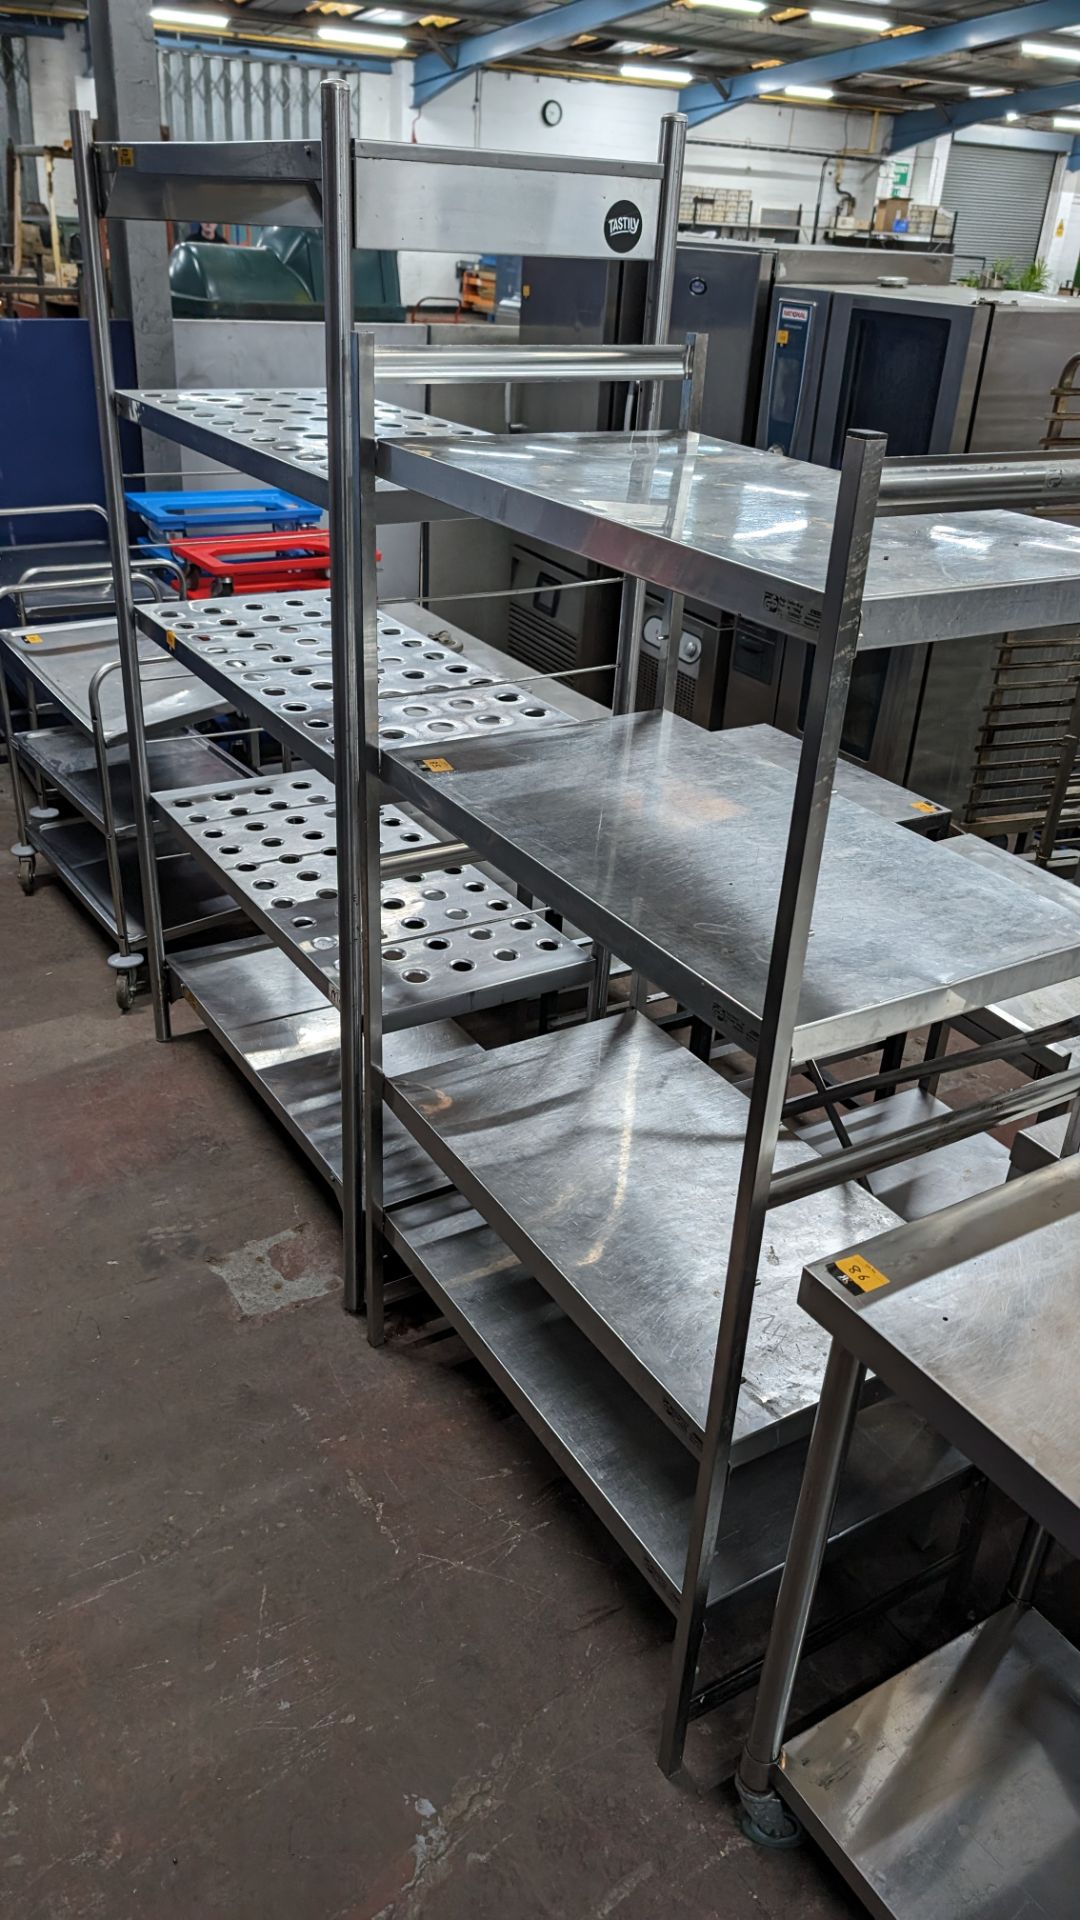 Viessmann stainless steel shelving unit with 4 shelves, max external dimensions 1000 x 1800 x 600mm - Image 2 of 4